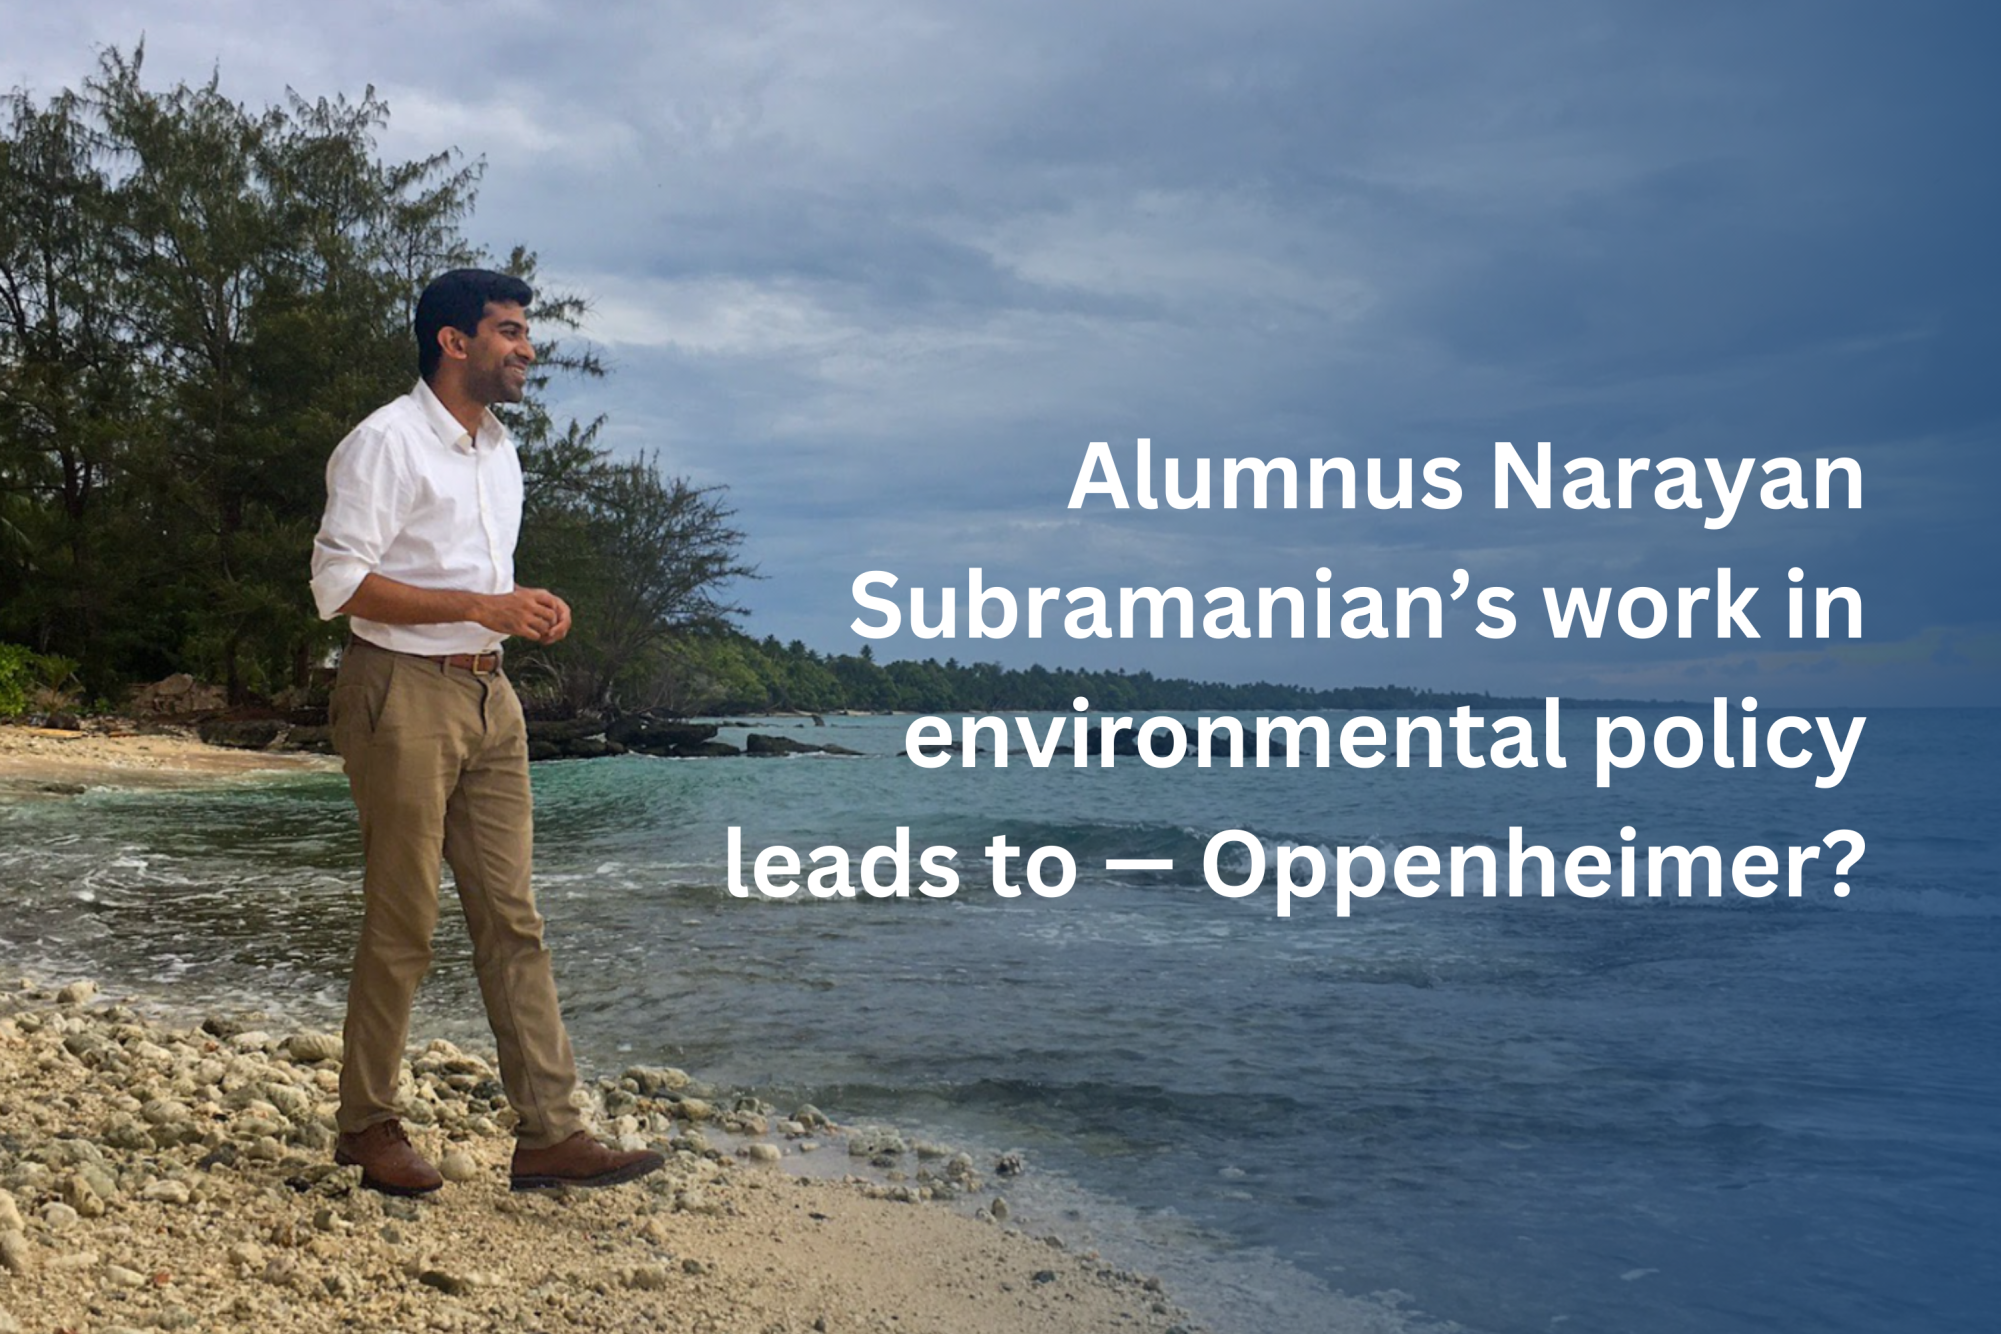 Subramanian, visiting the Marshall Islands in 2017 during his work as a consultant for Independent Diplomat, collecting data and consulting with government officials, to advise the small island nation on developing a “2050 Climate Strategy”.

